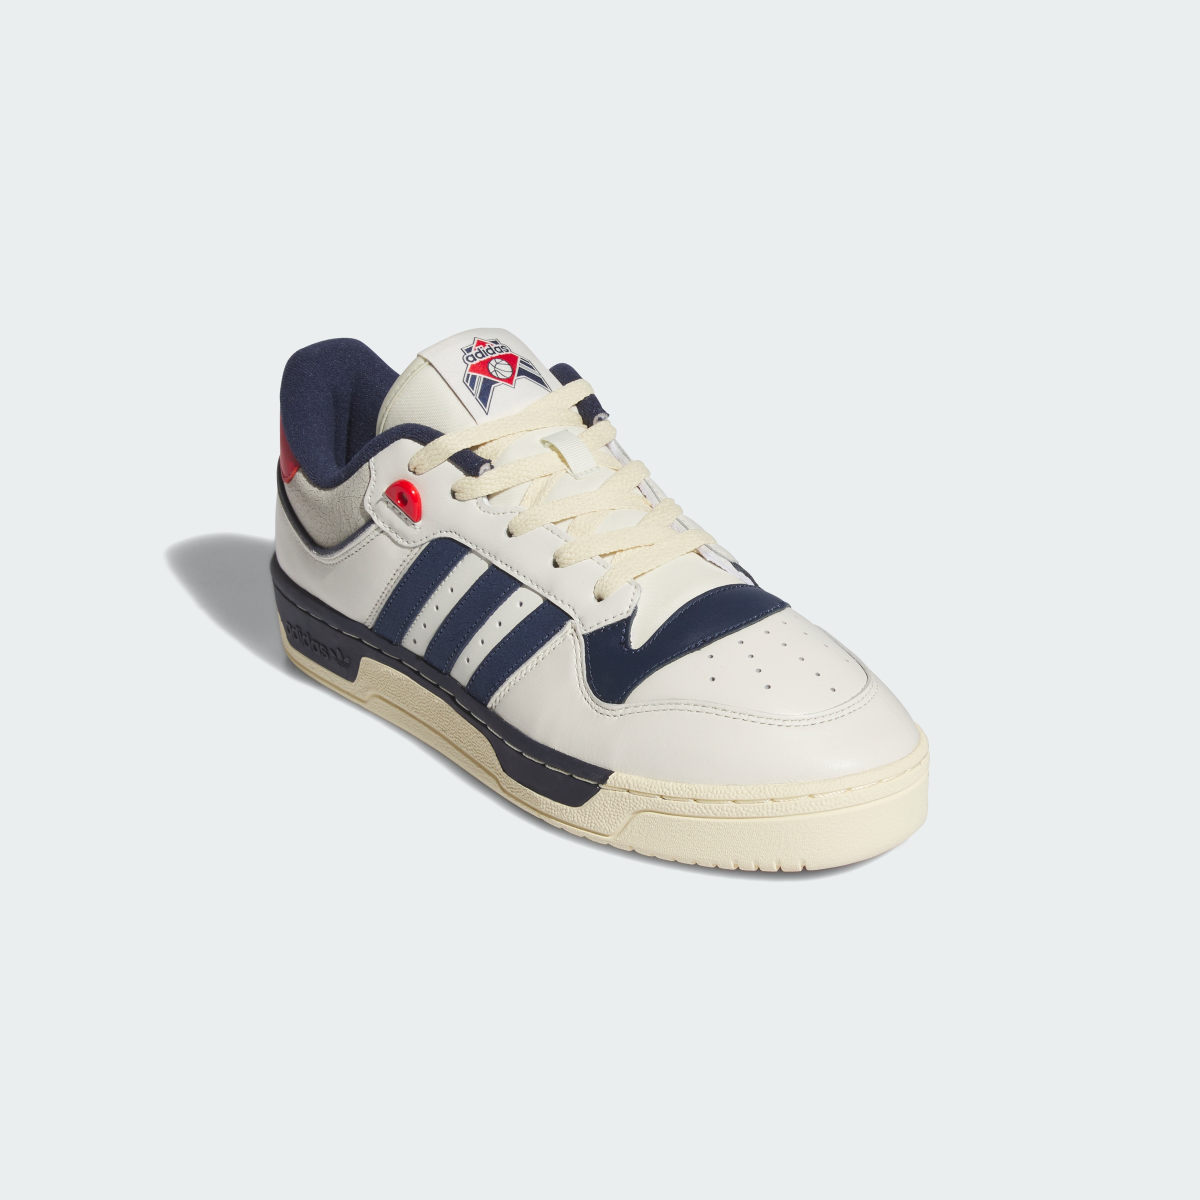 Adidas Sapatilhas Rivalry 86 Low. 5